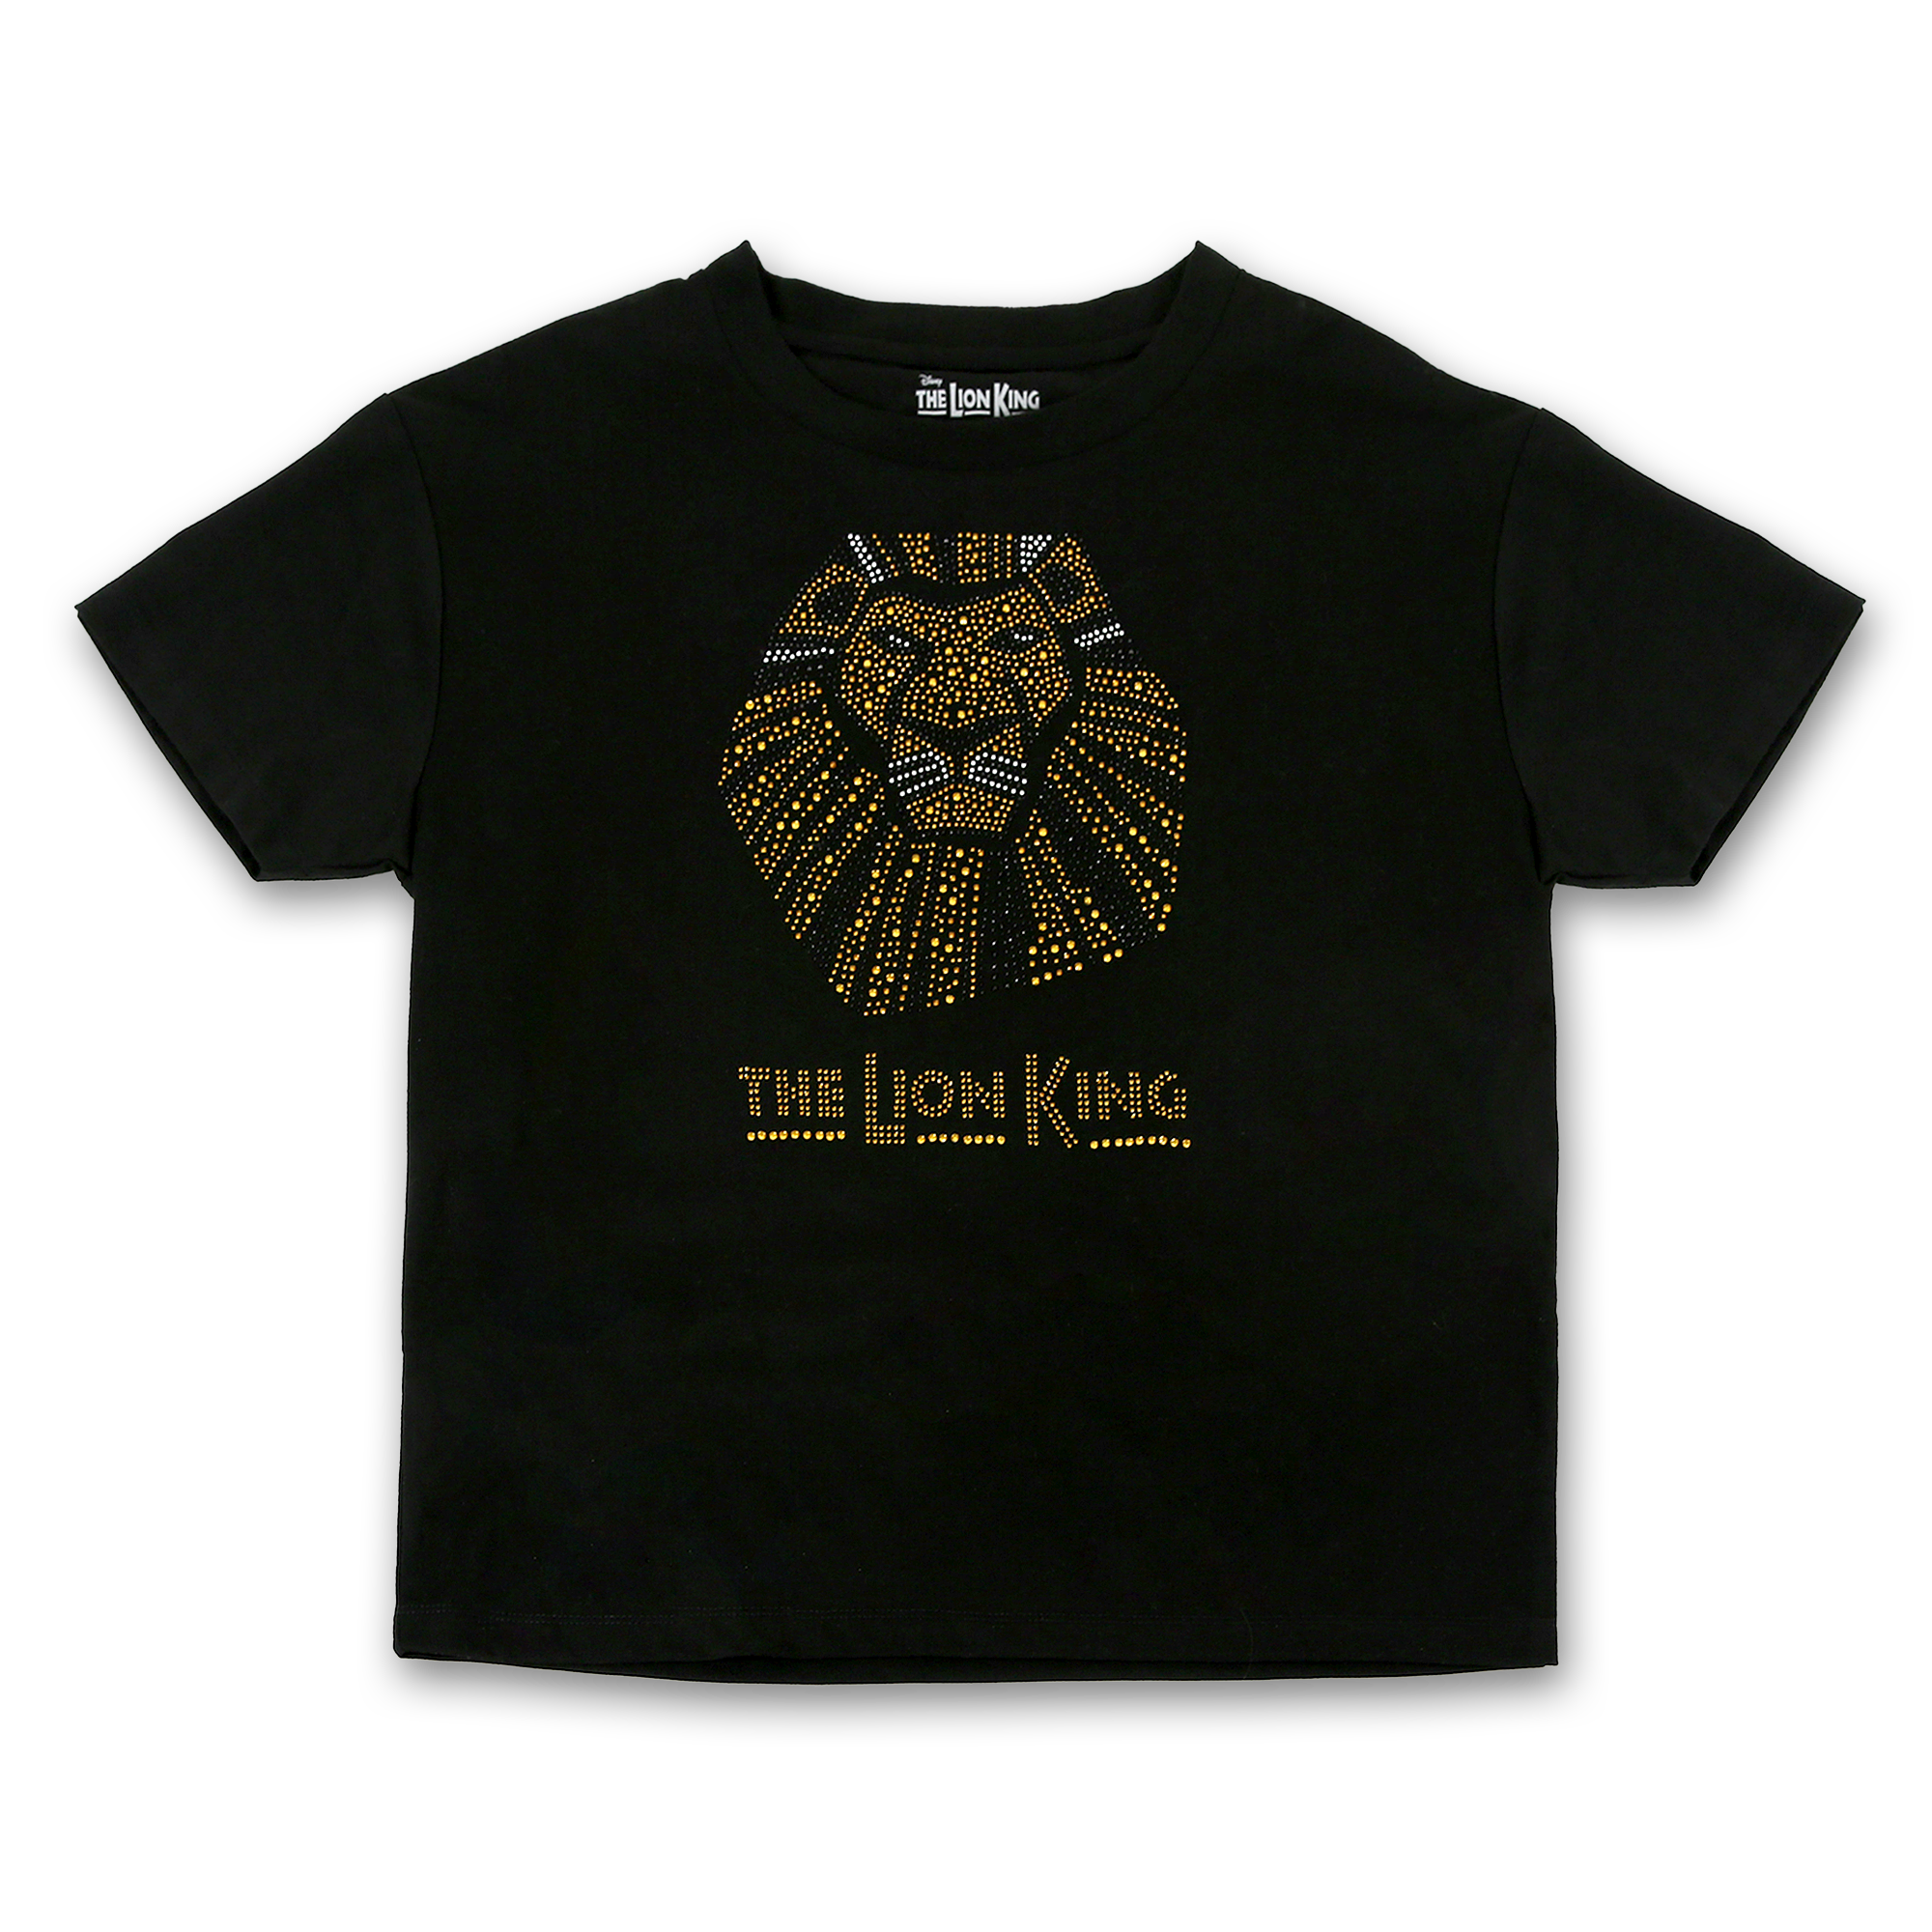 The Lion King the Broadway Musical - Rhinestud T-Shirt